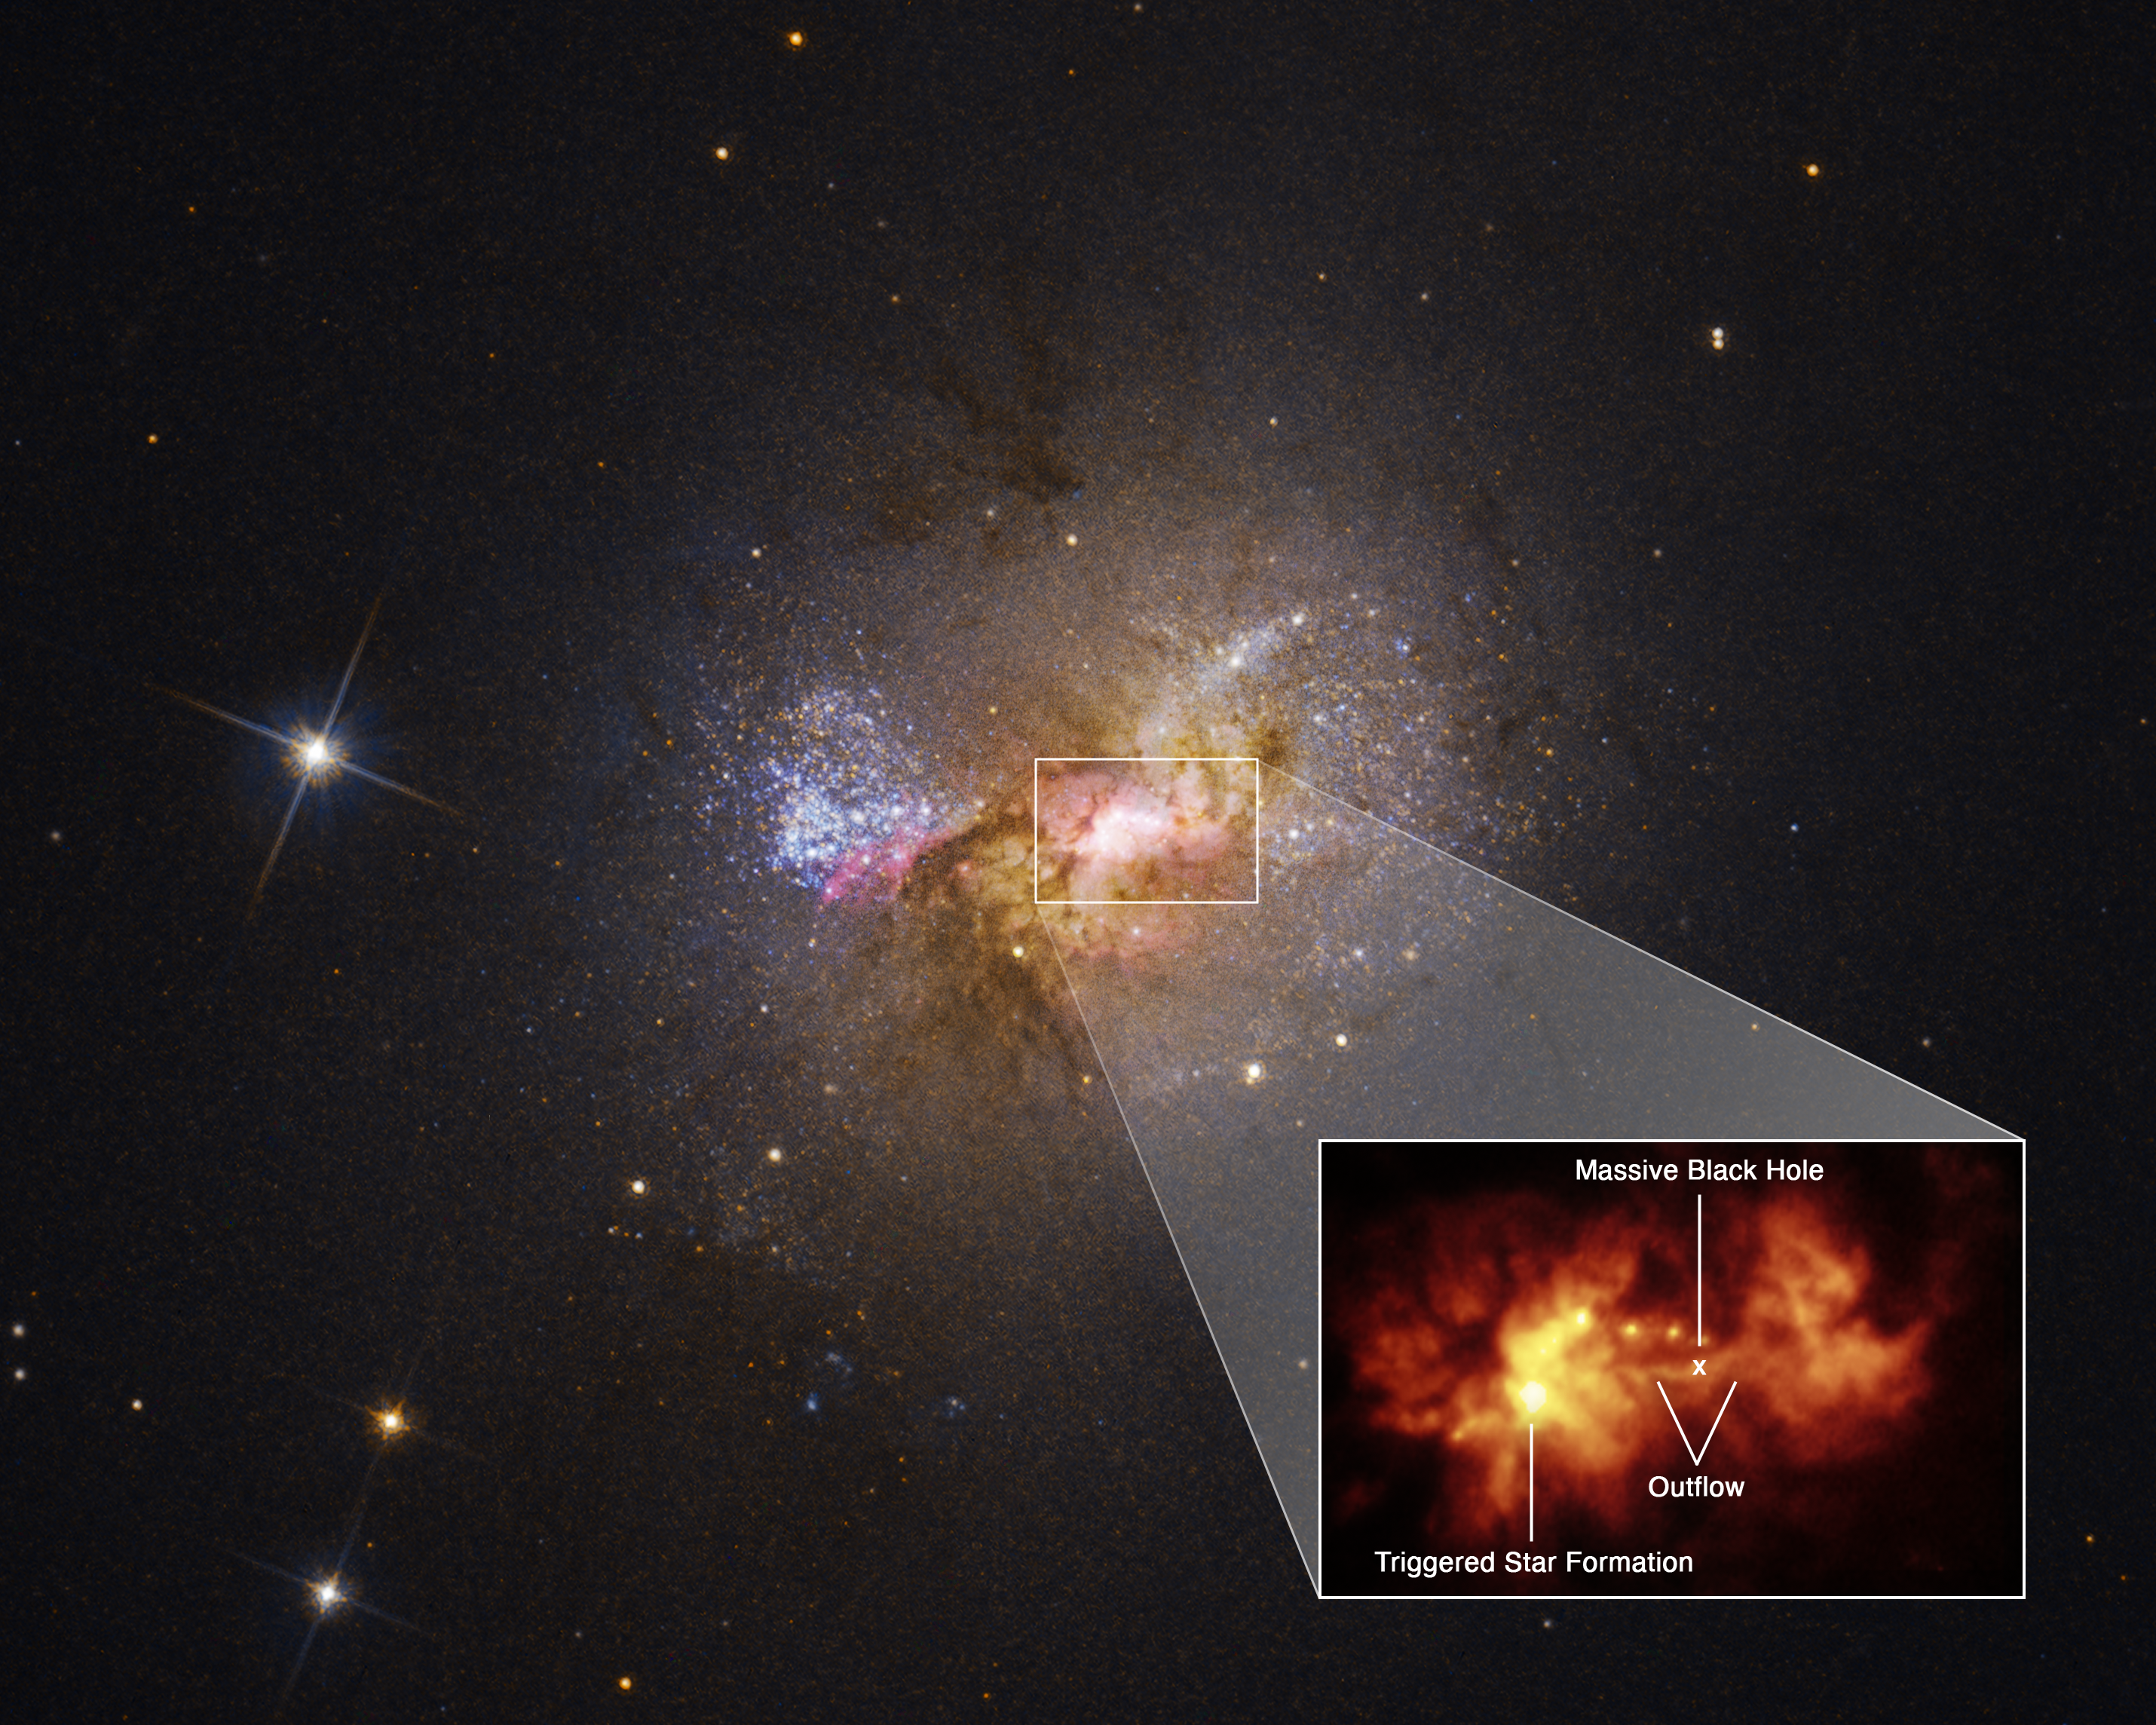 Image of galaxy Henize 2-10 with cut out of black hole forming stars